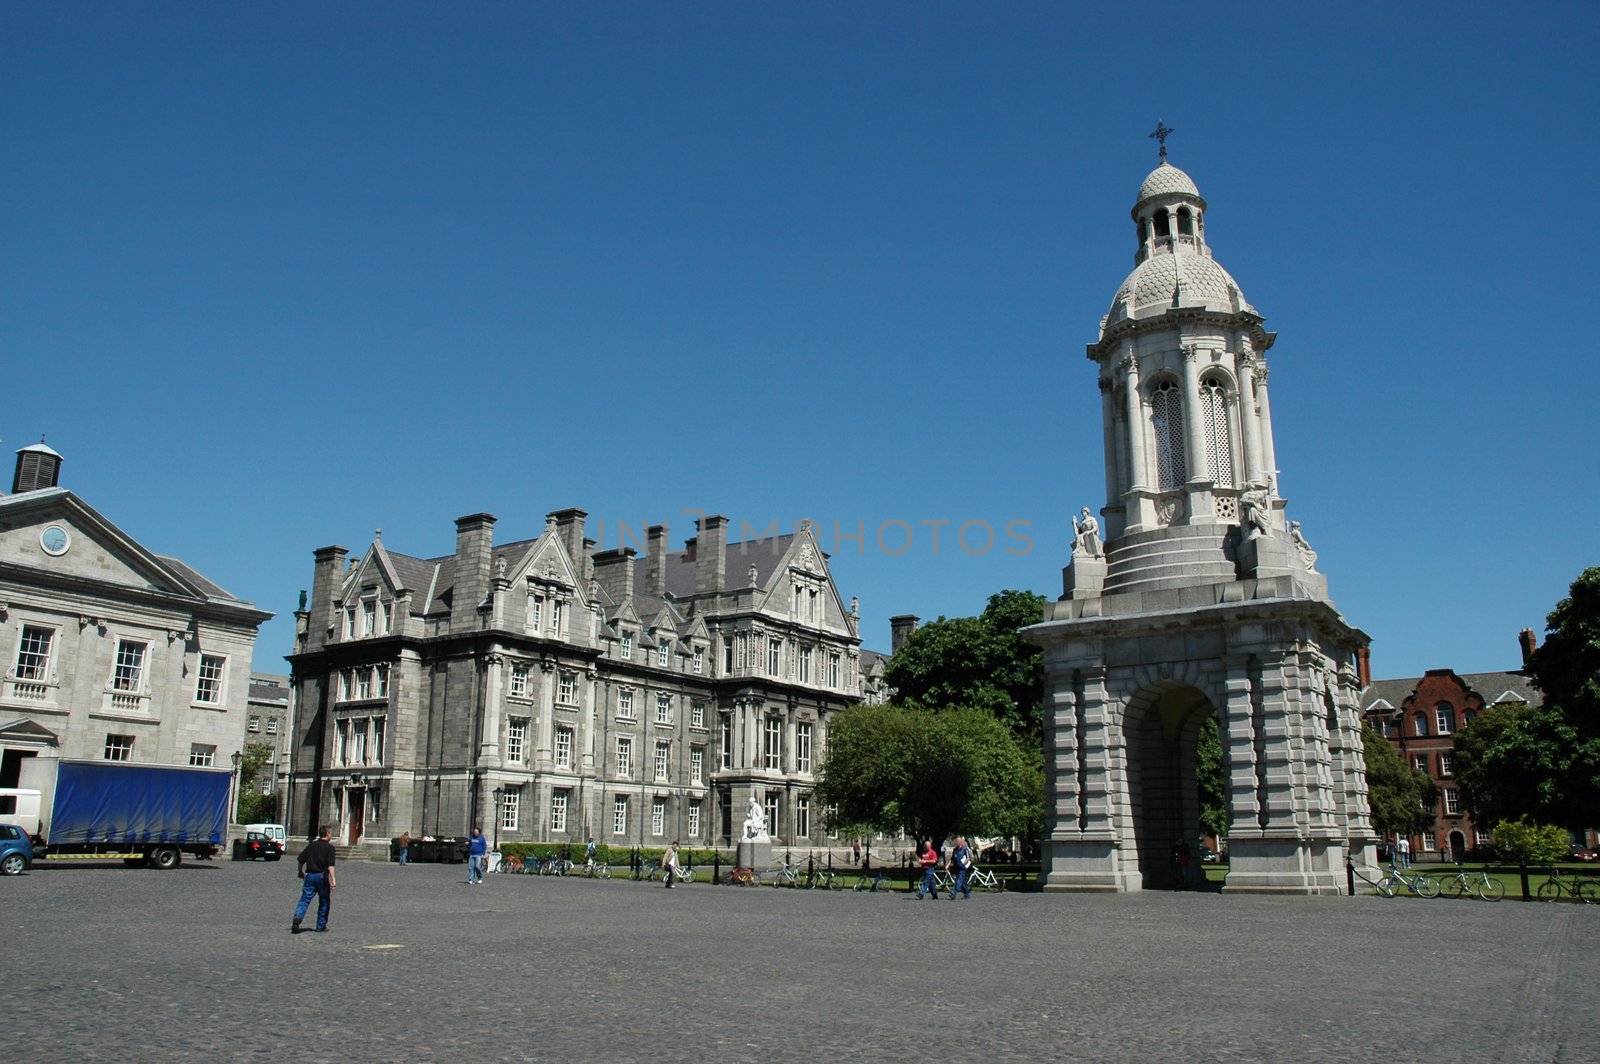 Wide angle shot of the Quad in Trinity College Dublin with the beautiful Bell tower to the right against a bright blue sky